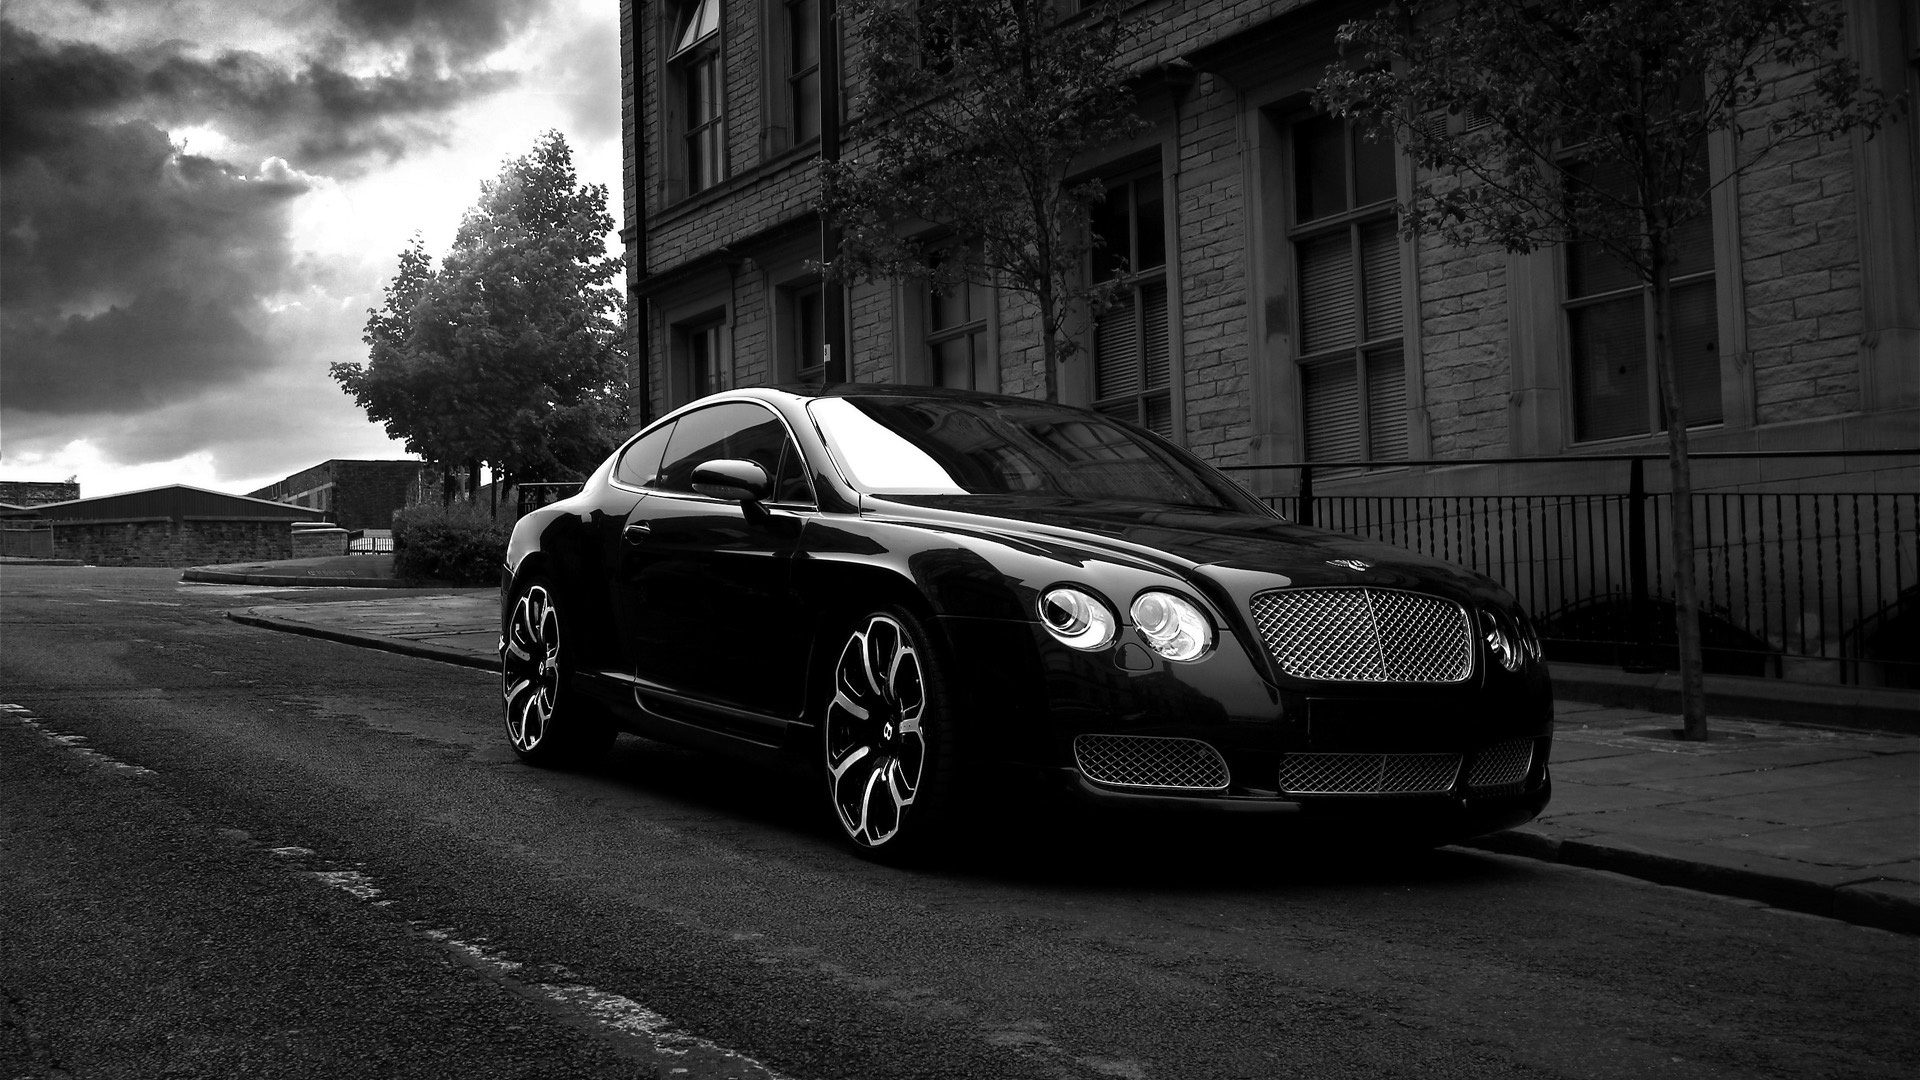 Bentley GTS Black Edition Project Kahn 2008 for 1920 x 1080 HDTV 1080p resolution